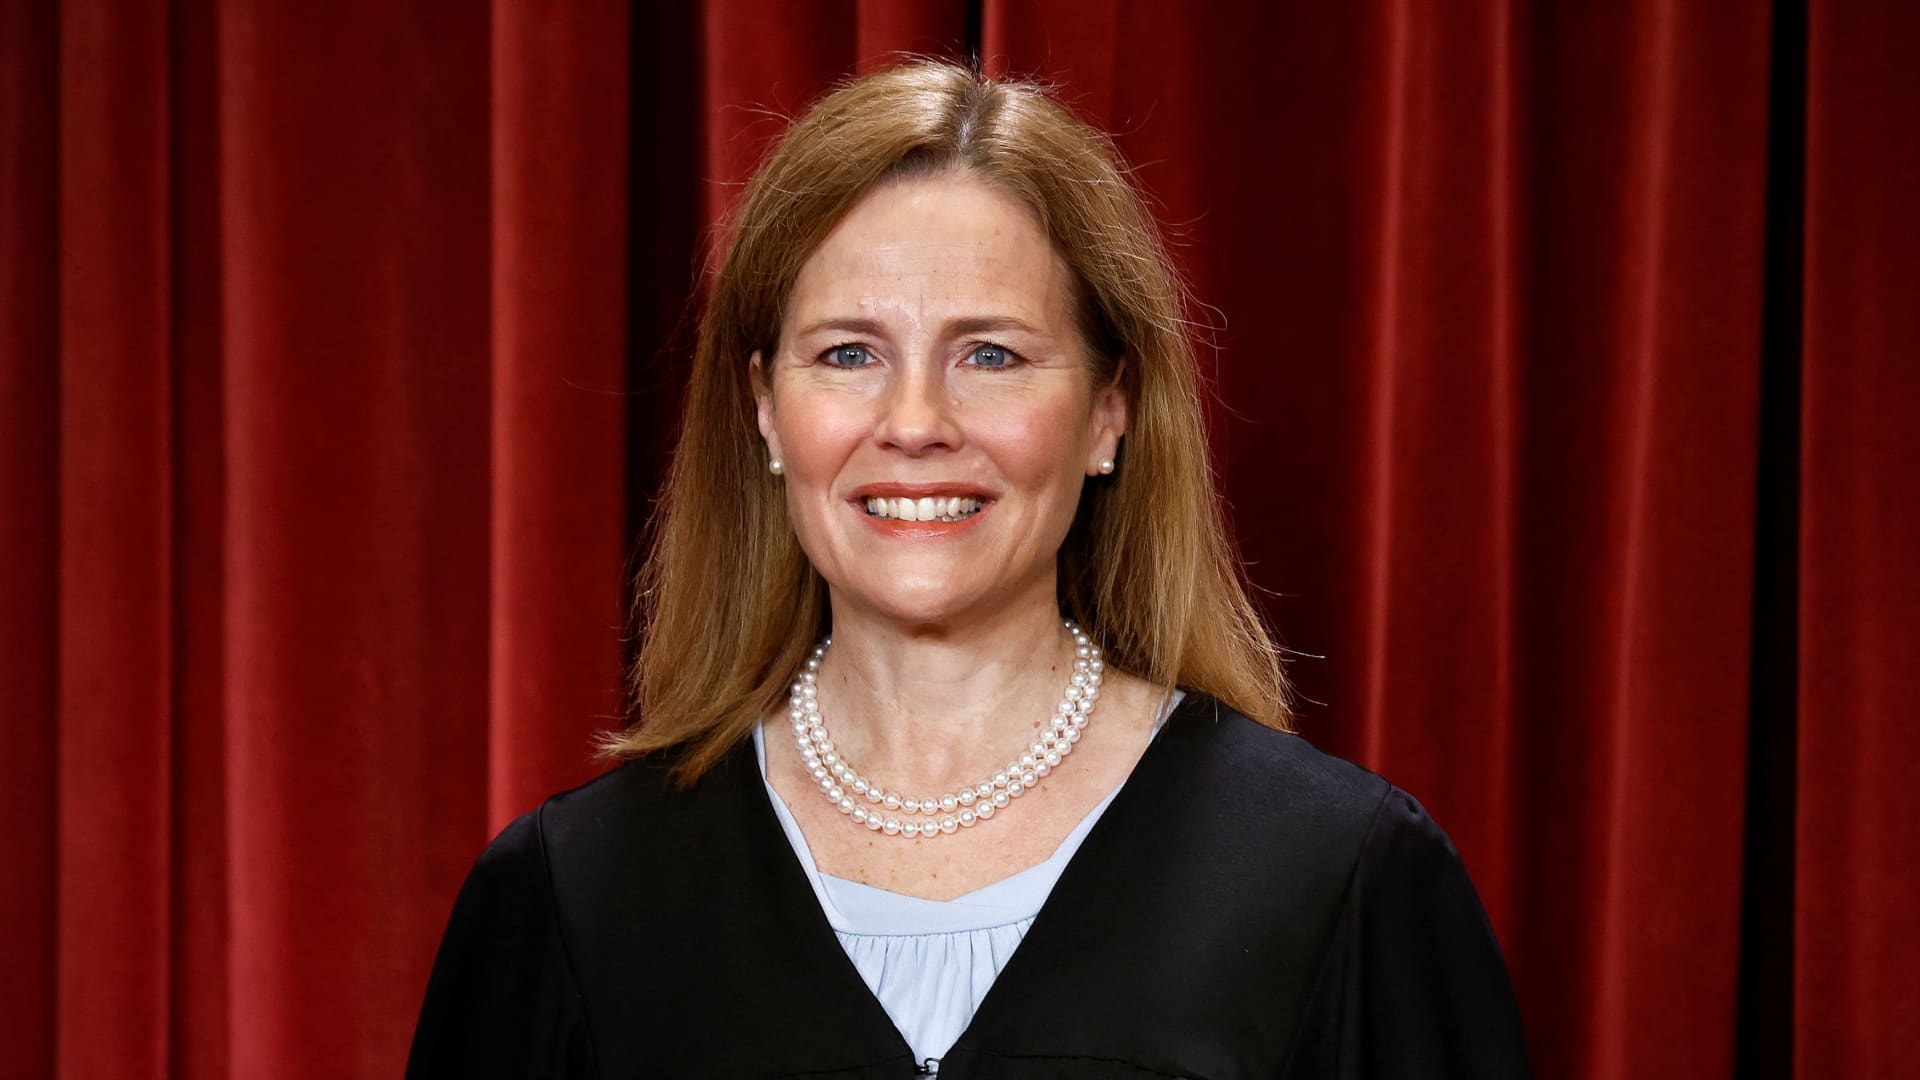 Supreme Court’s decision on Biden’s student loan forgiveness plan may hinge on Justice Amy Coney Barrett